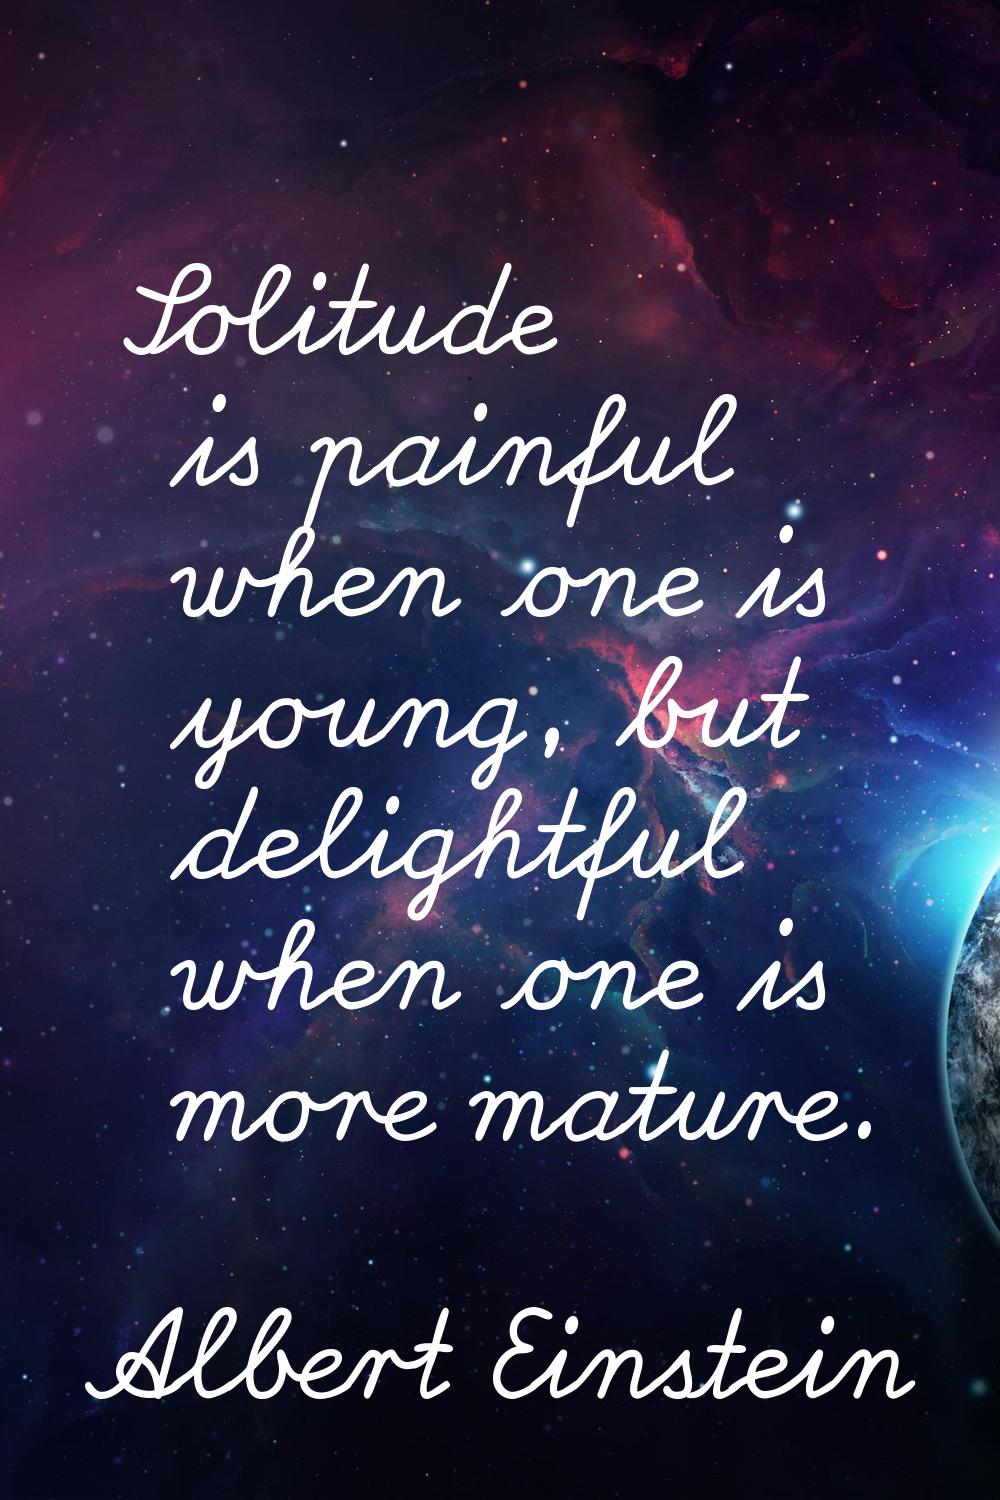 Solitude is painful when one is young, but delightful when one is more mature.